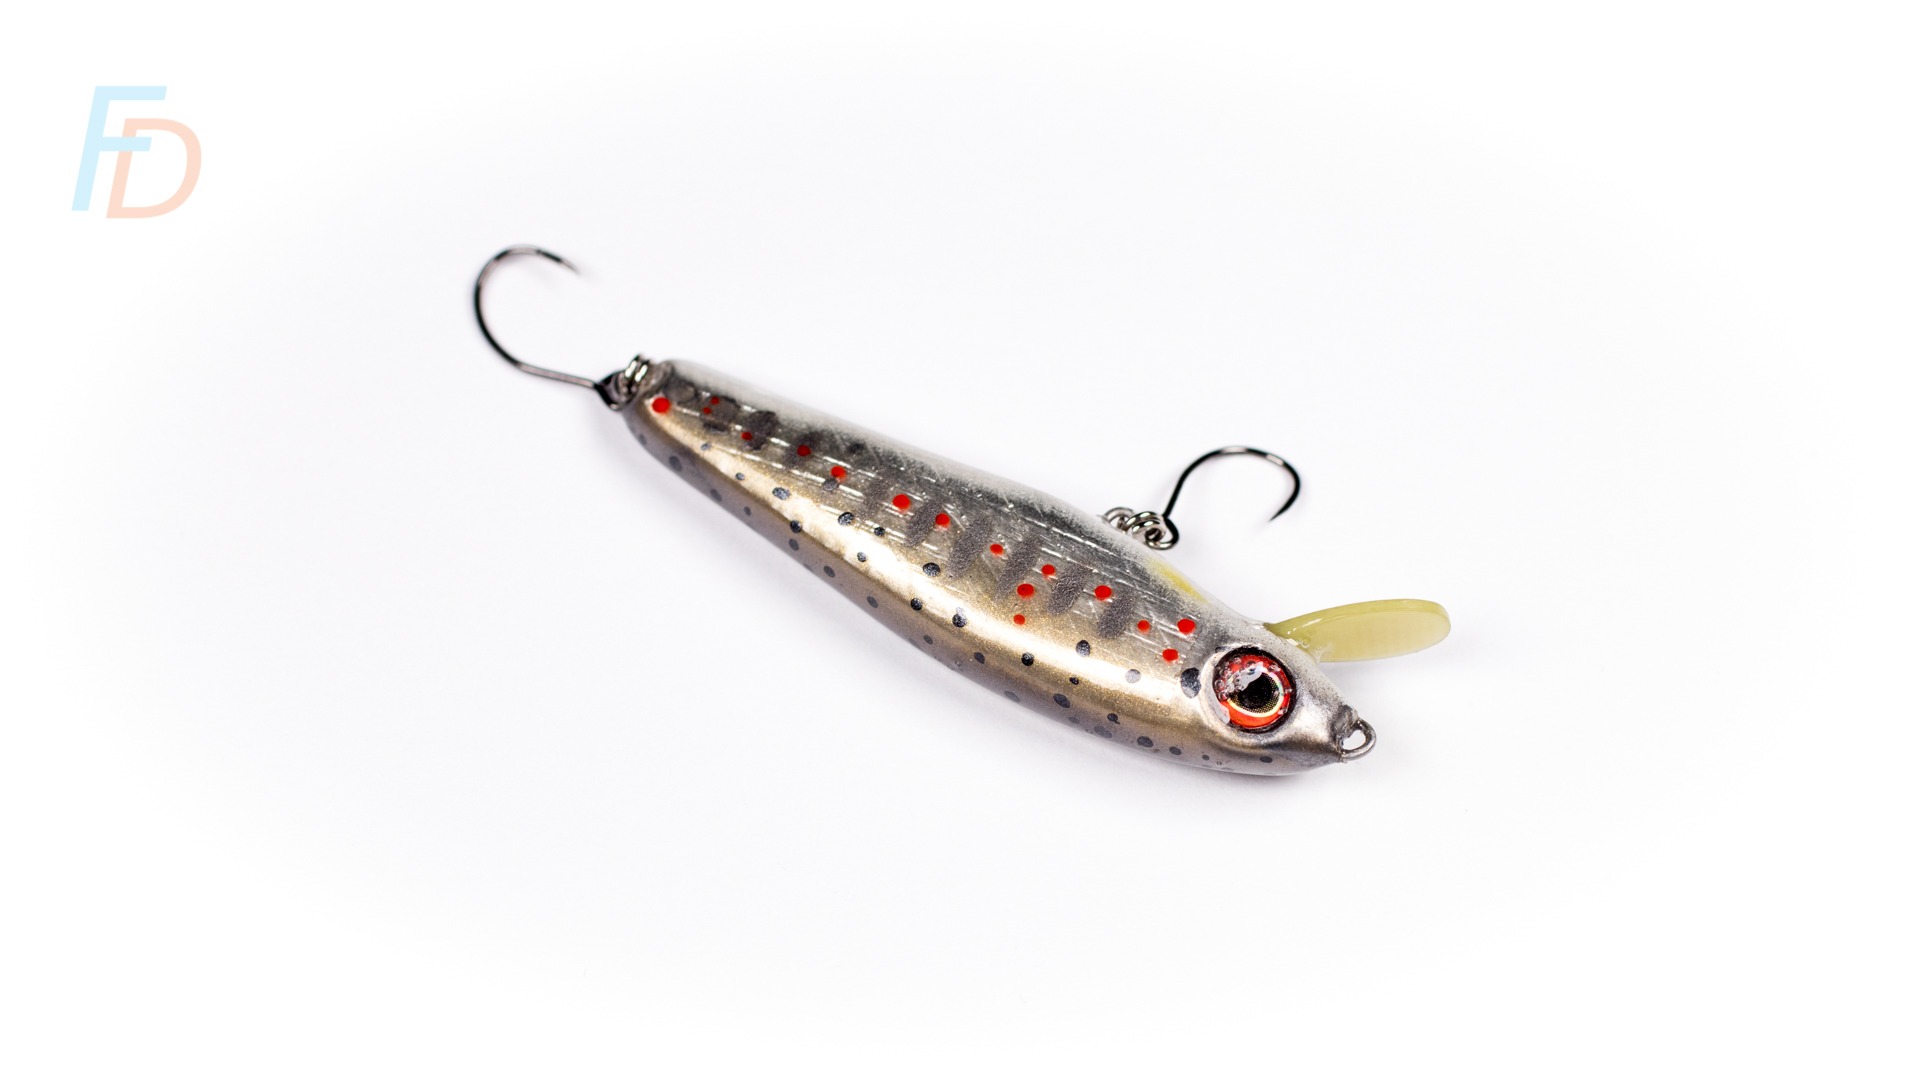 The Weirdest Fishing Lures Ever